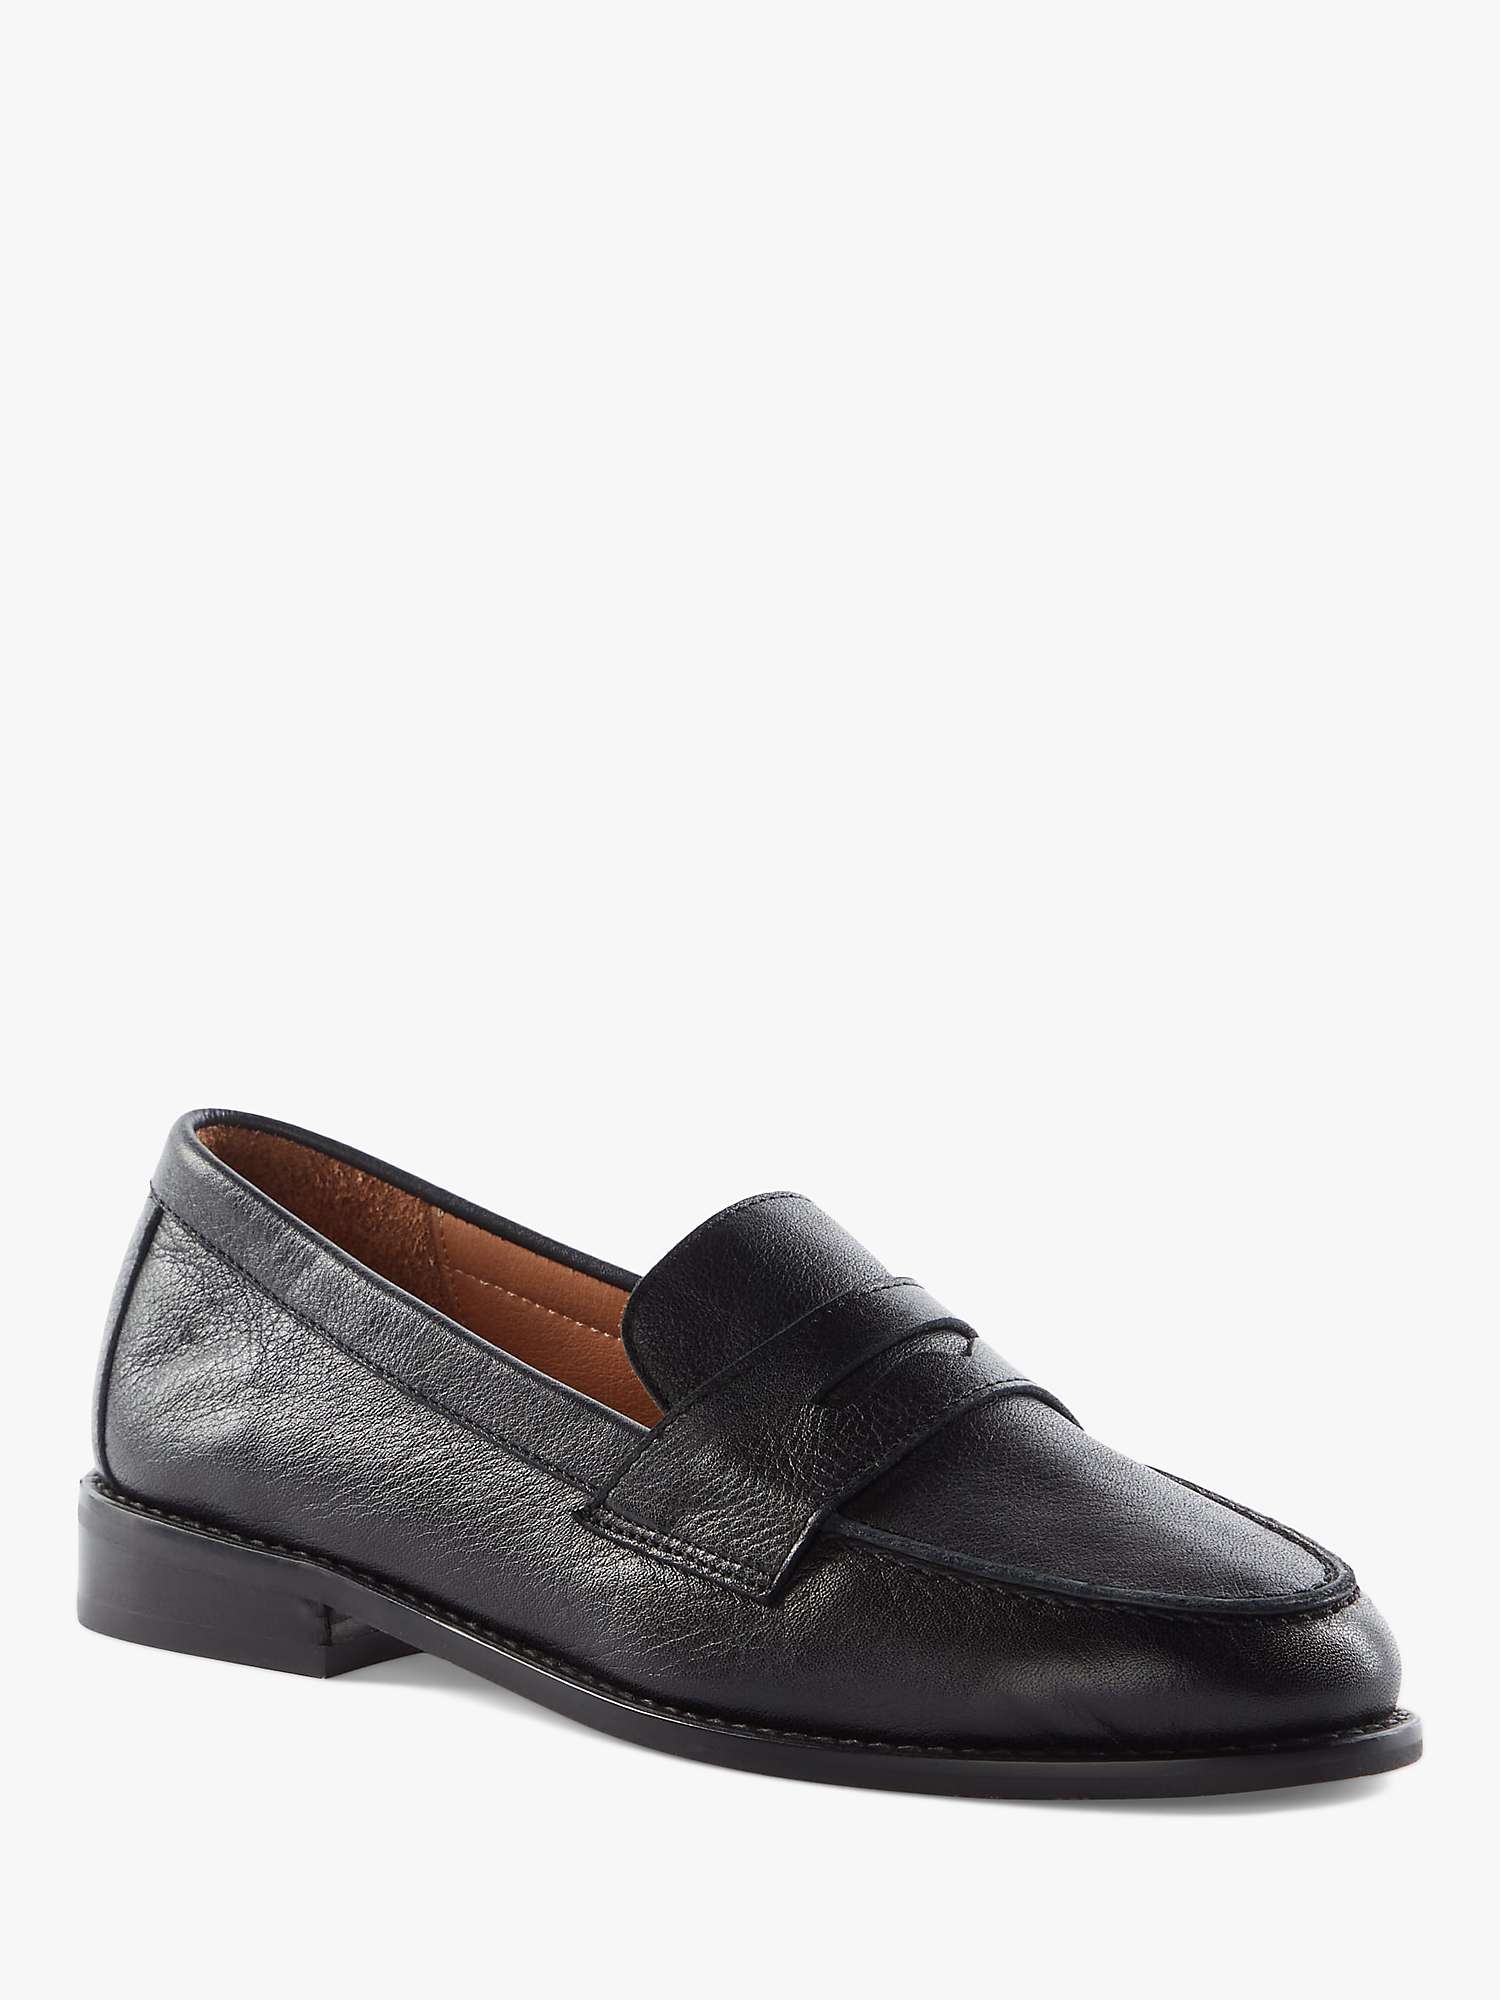 Buy Dune Ginelli Leather Penny Loafers, Black Online at johnlewis.com